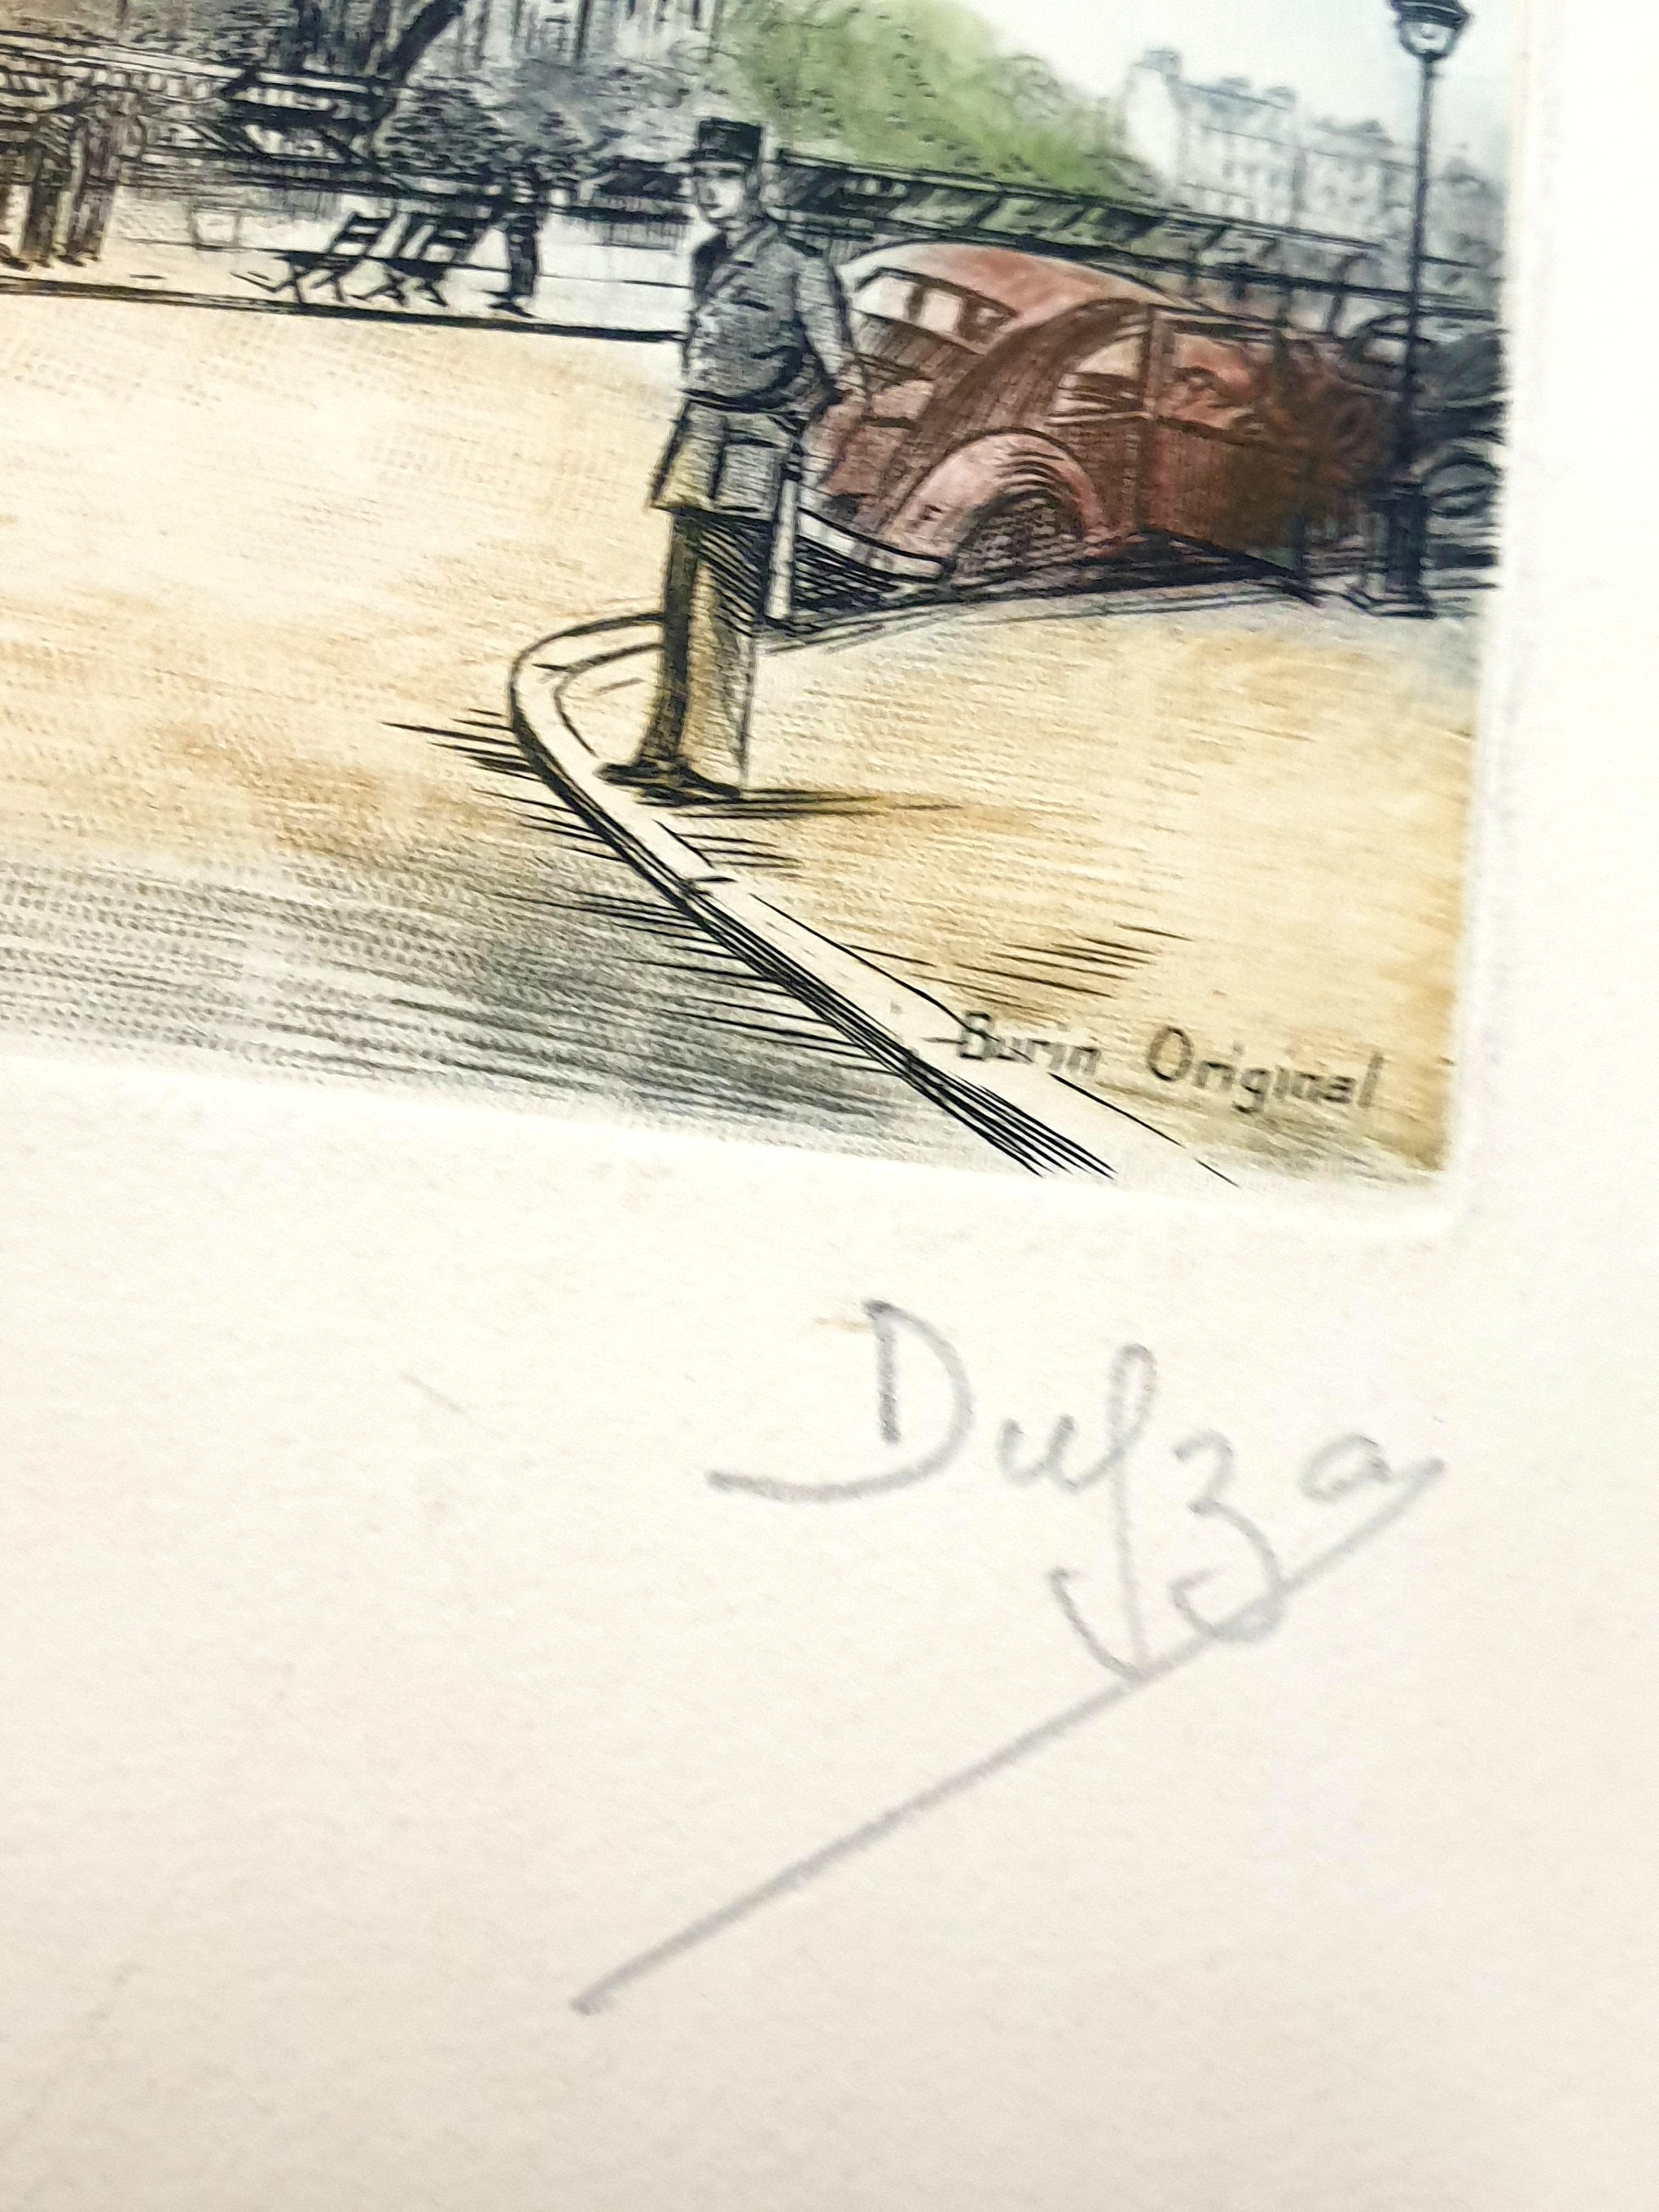 Dufza - Paris Notre Dame - Original Handsigned Etching
Circa 1940
Handsigned in pencil
Dimensions: 20 x 25 cm 
Unumbered as issued